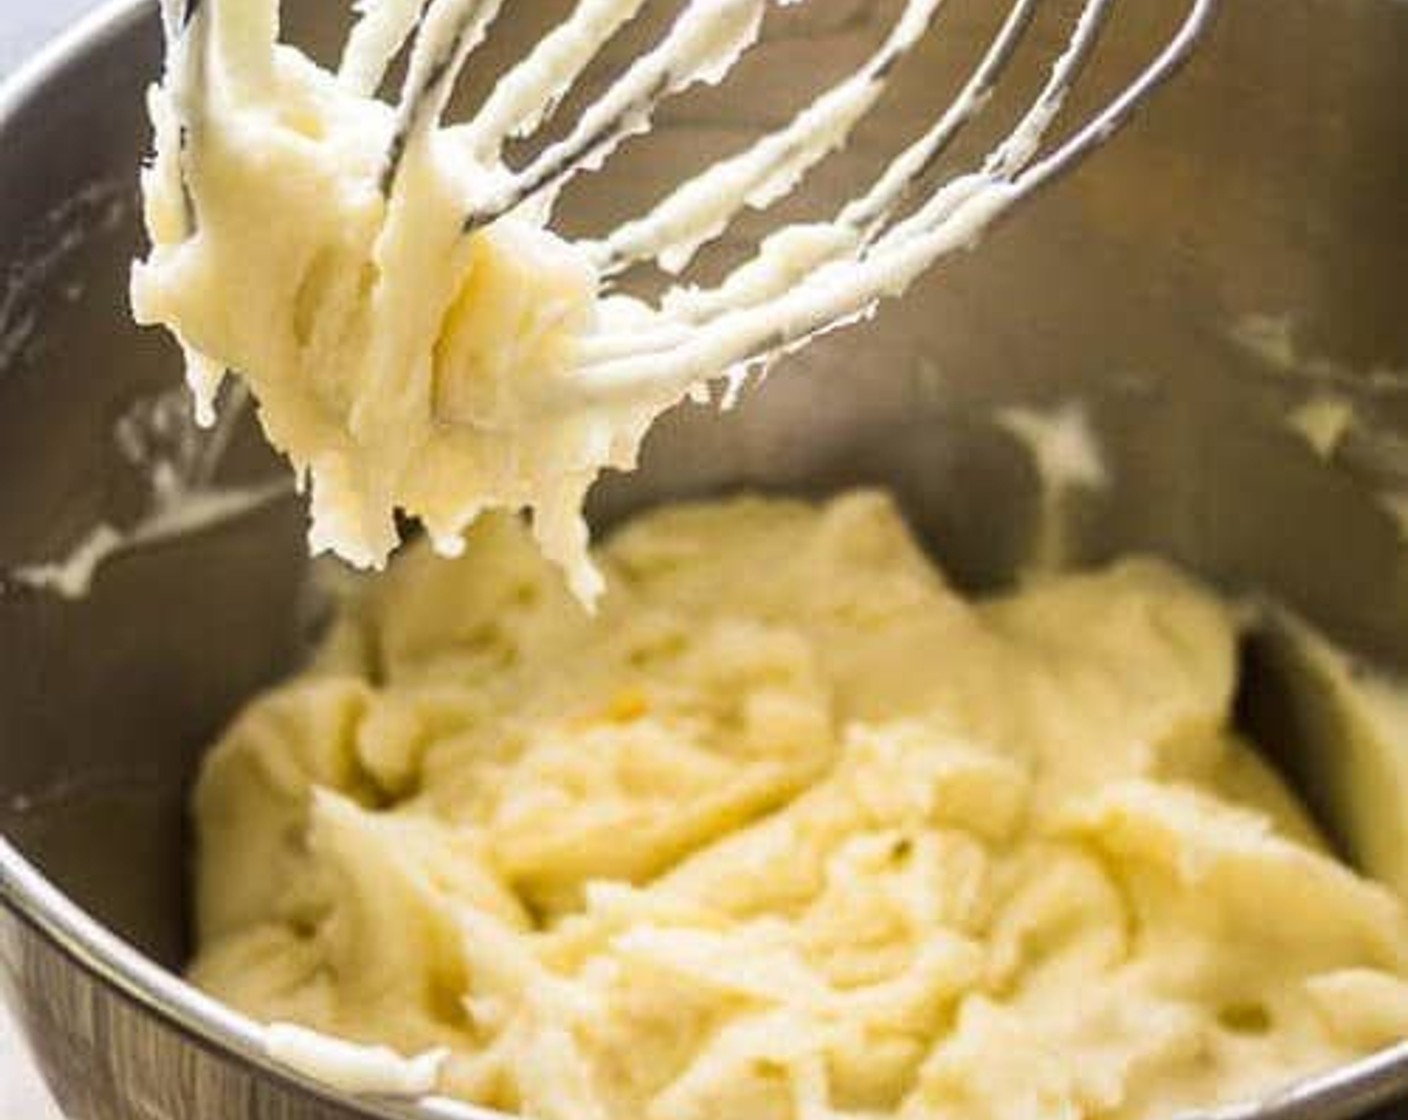 step 5 Slowly add milk mixture to potatoes. Once liquid has been added, speed up mixer and beat potatoes until creamy texture is achieved.